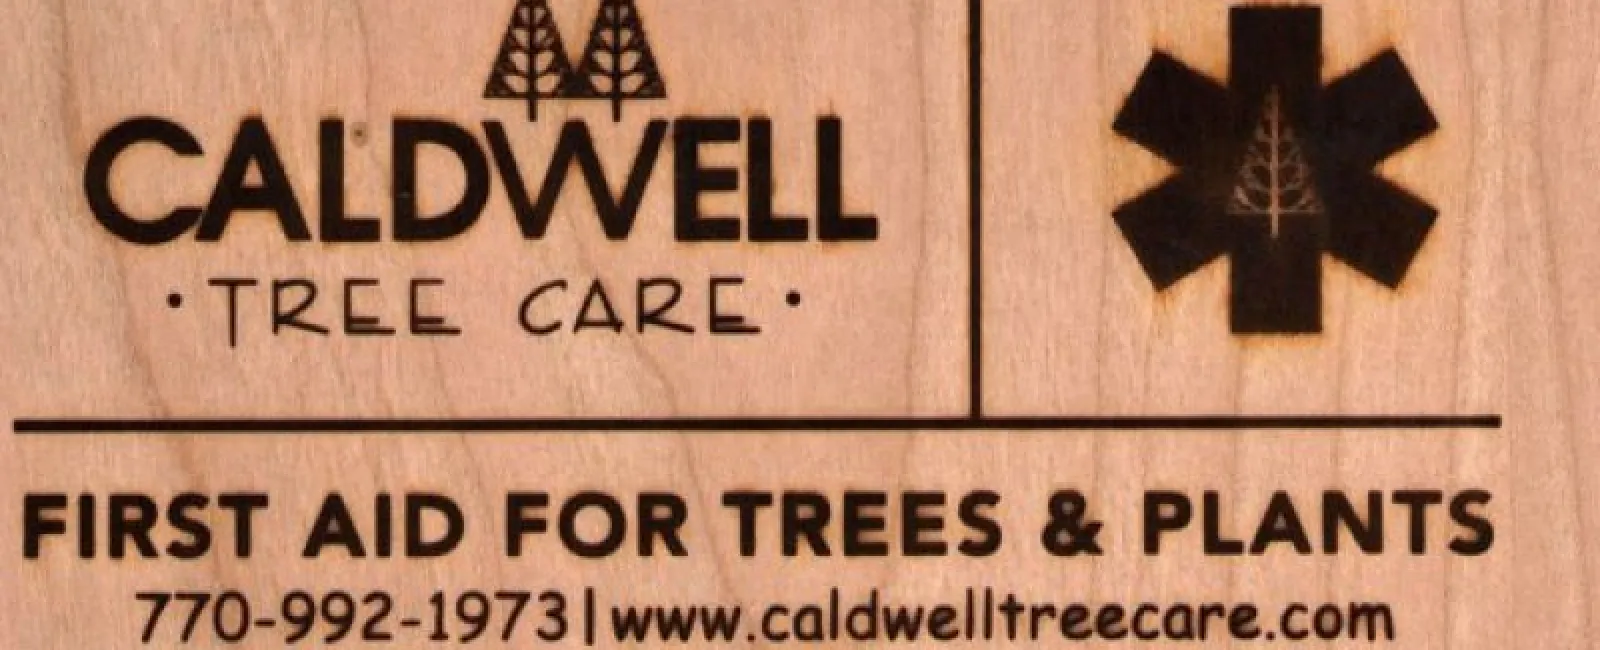 We are Caldwell Tree Care